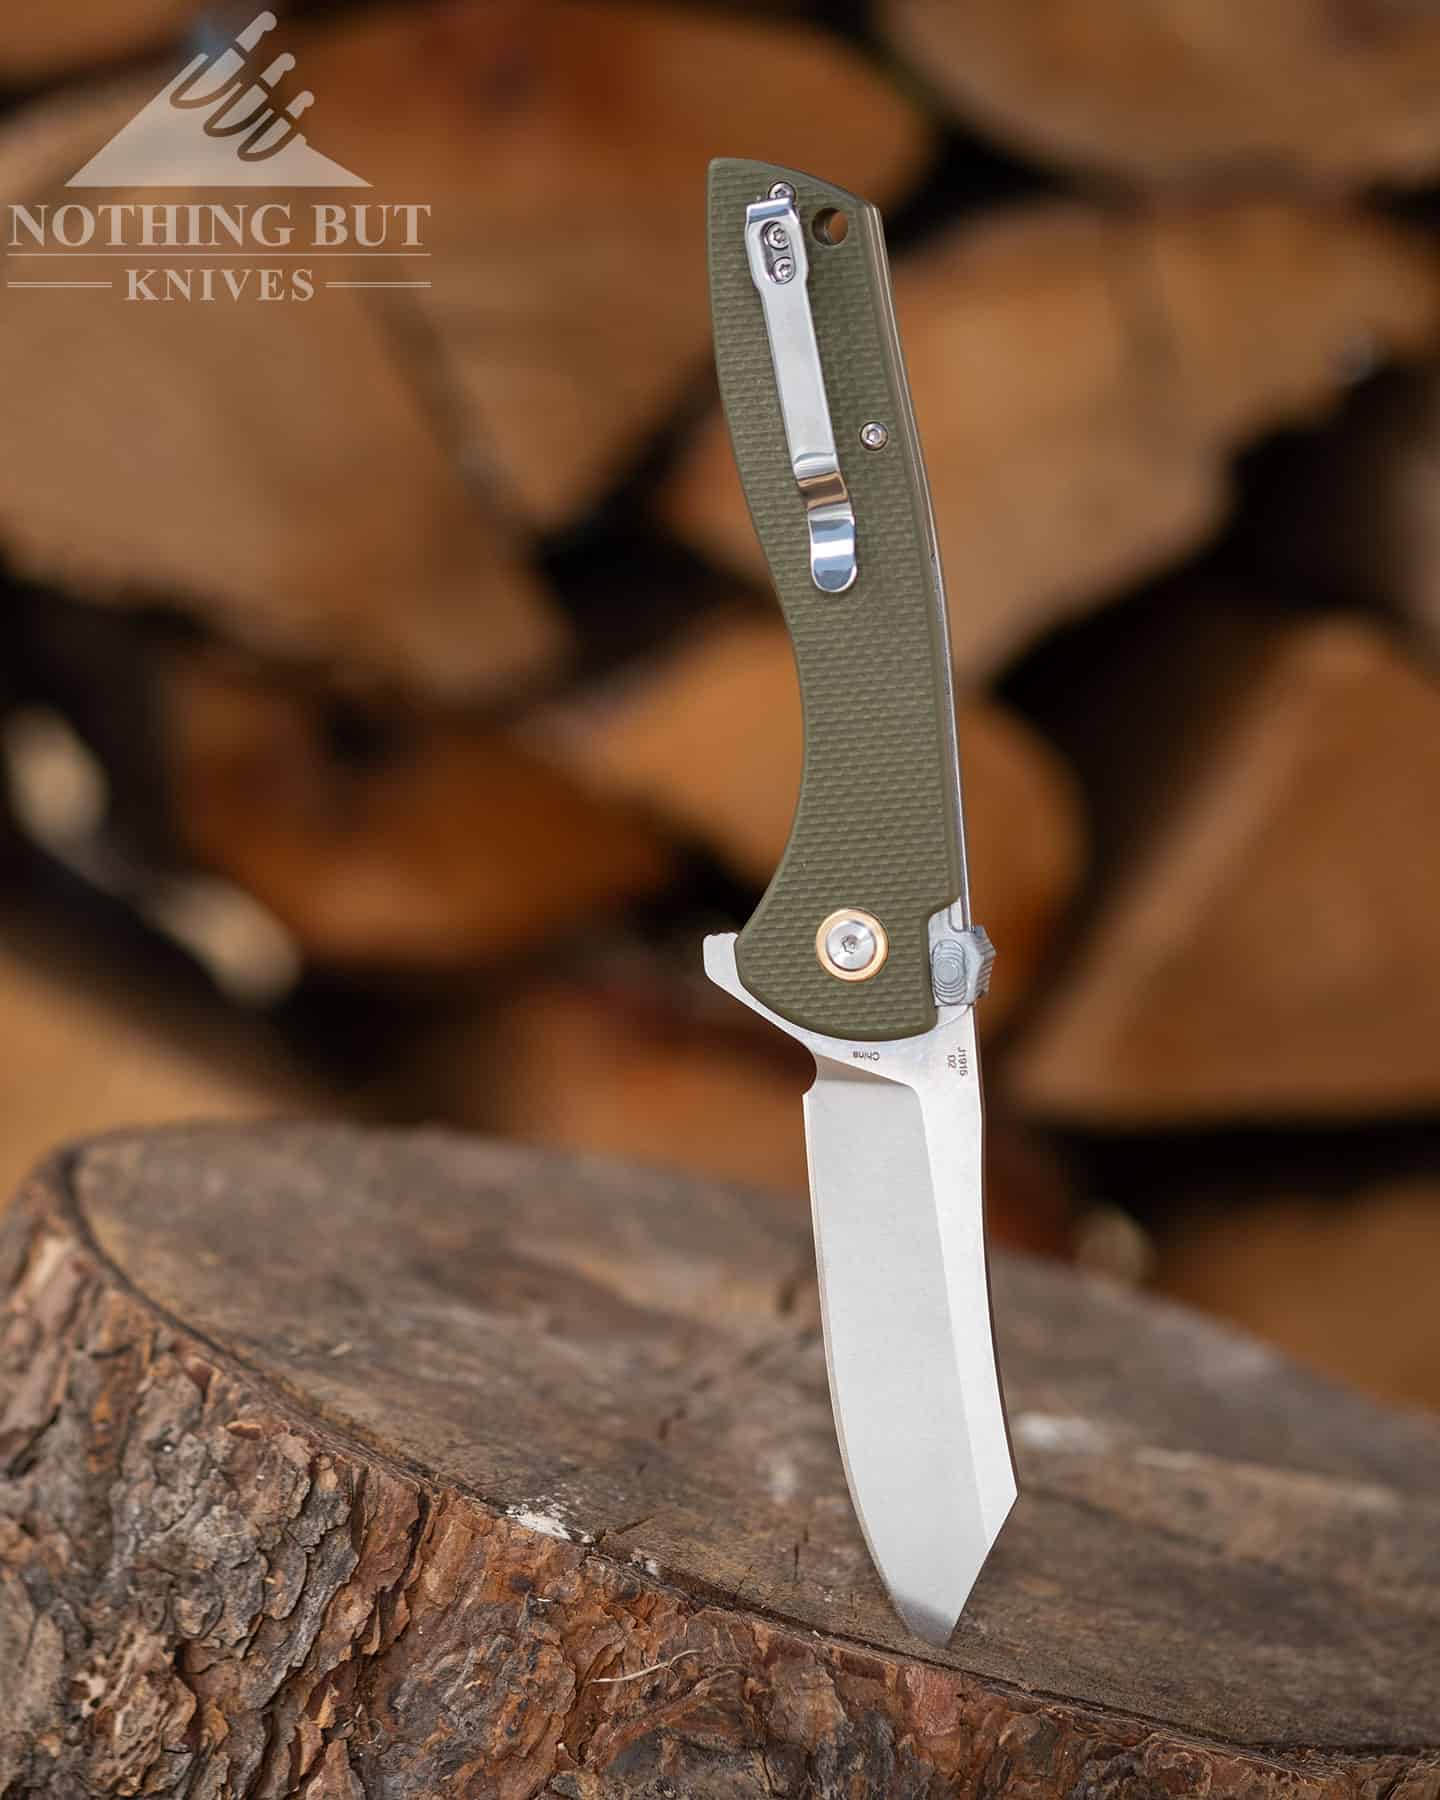 Big Knives on a Budget: 3 'Choppers' Tested